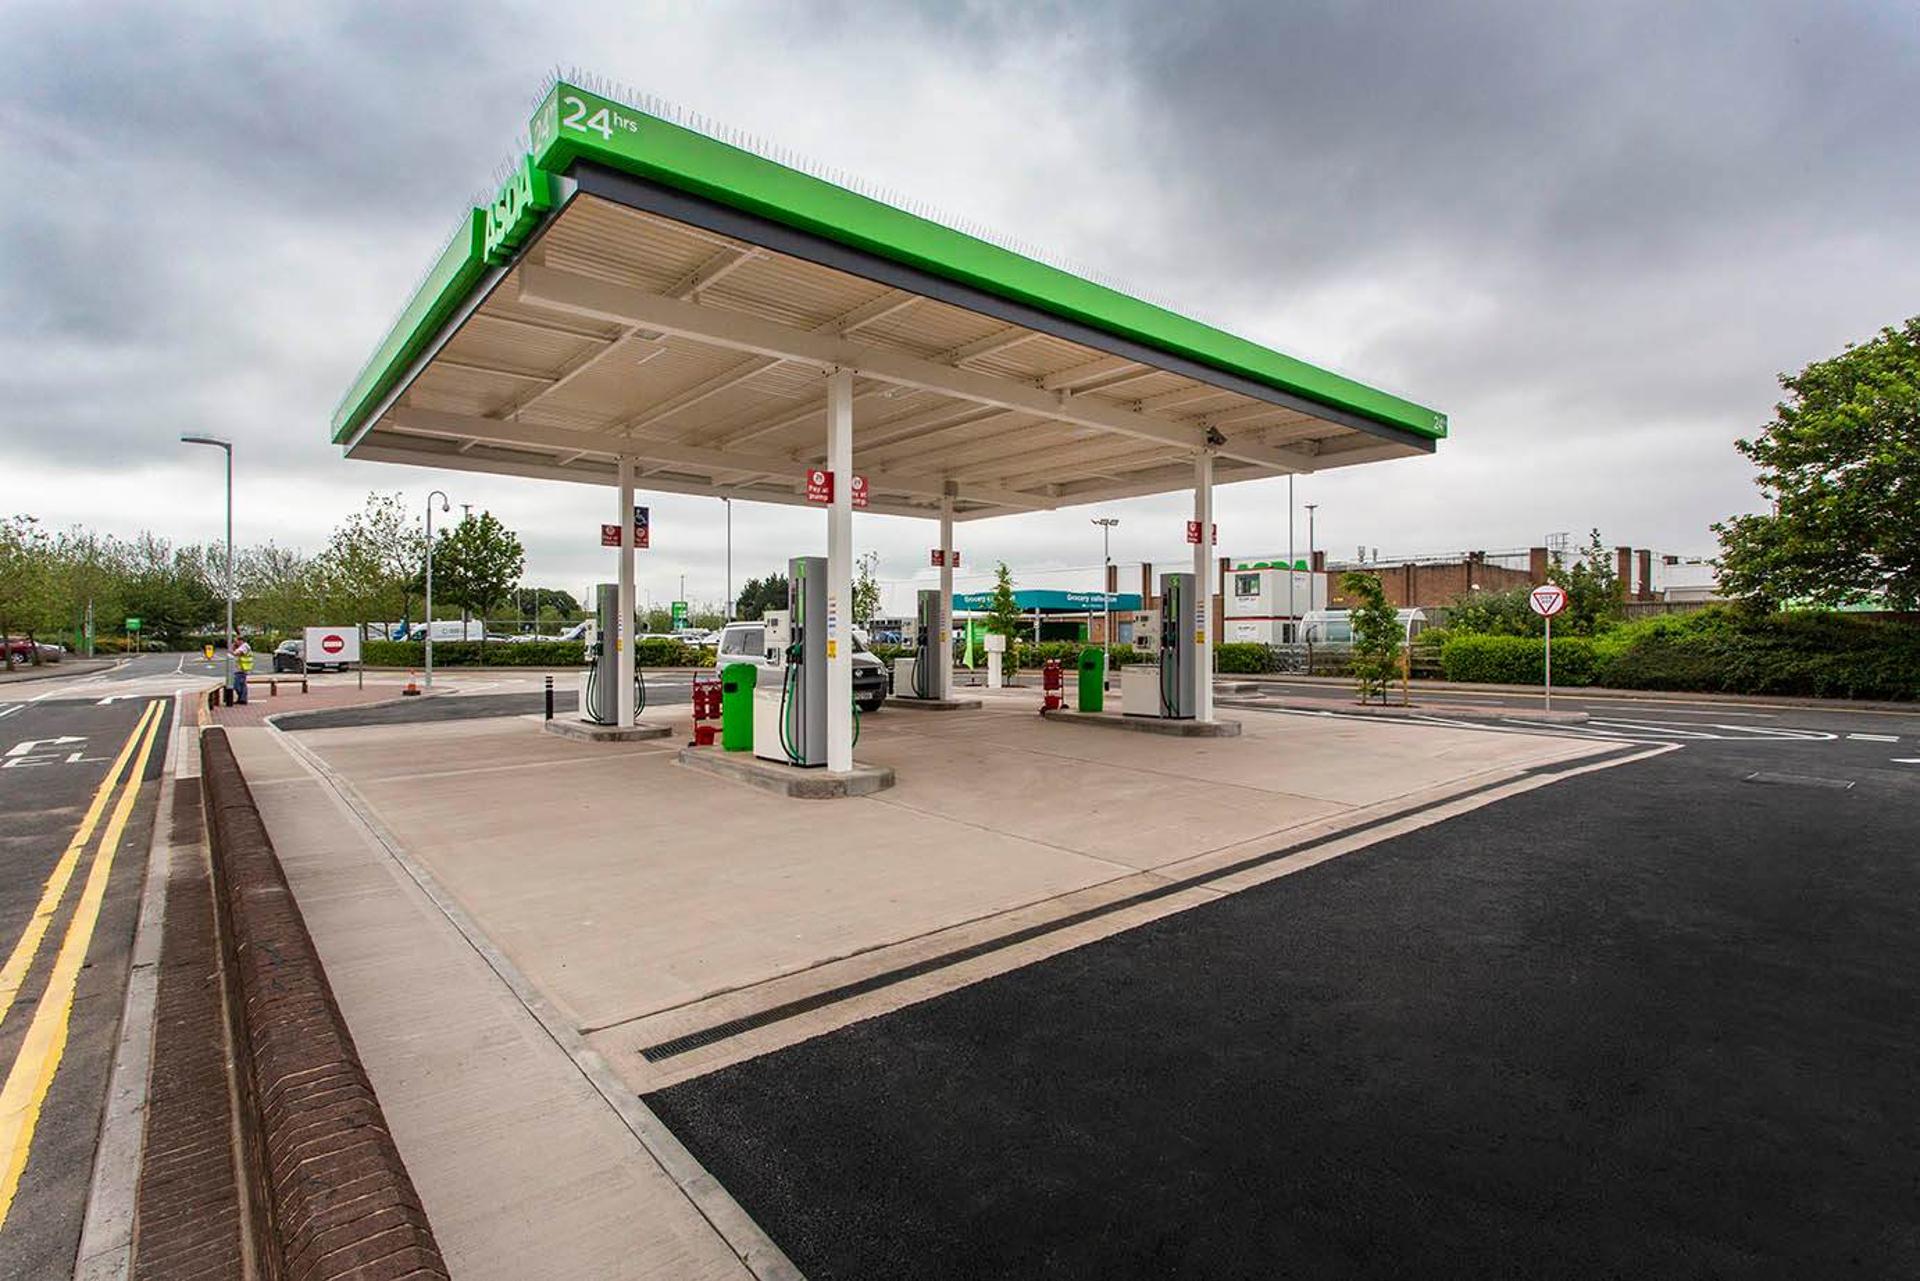 EG Group’s £750m Asda forecourts acquisition collapses